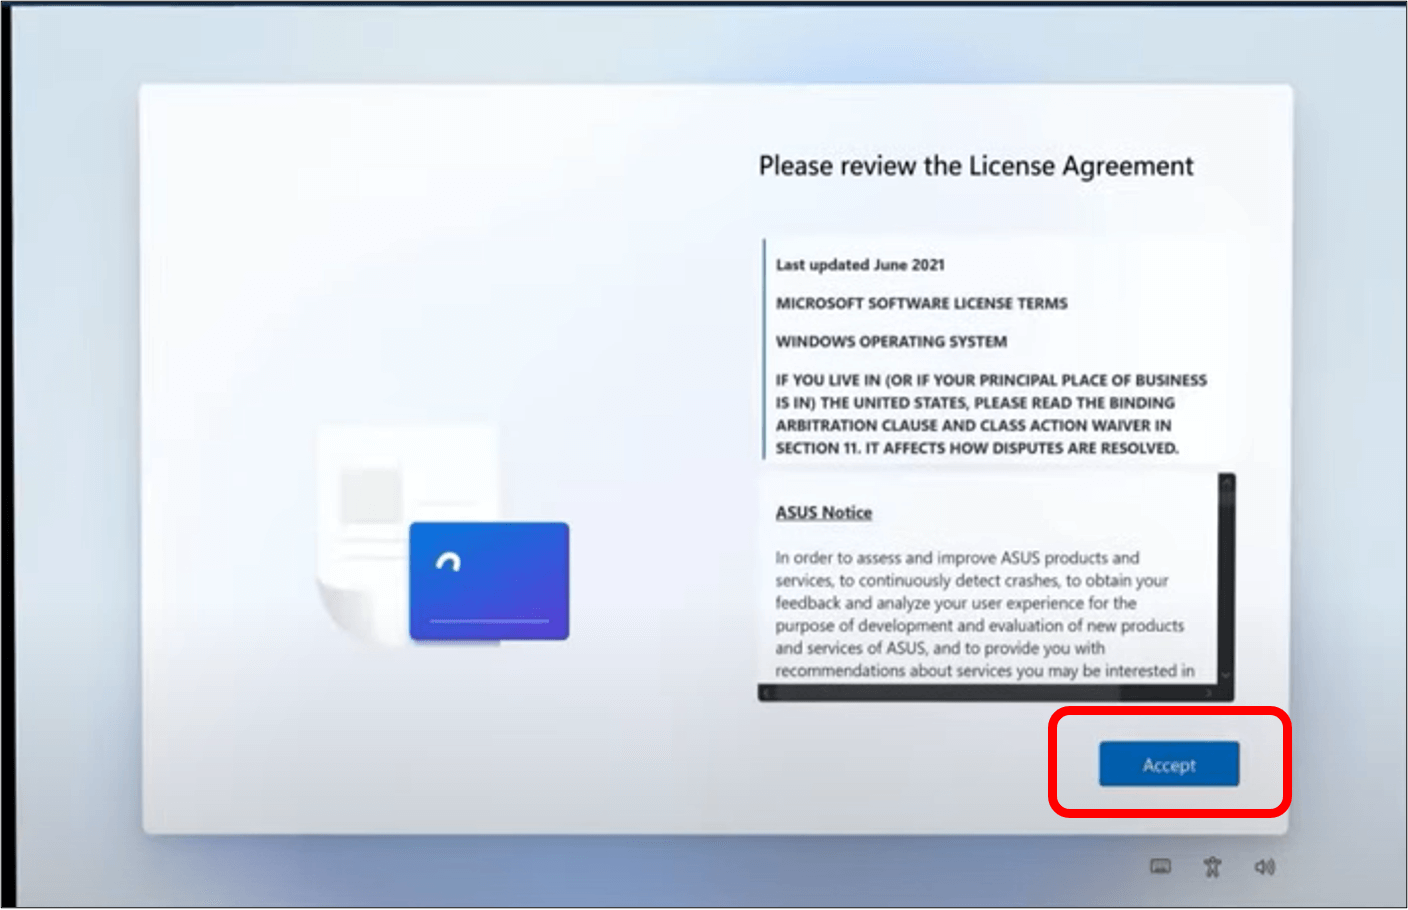 Windows license agreement screen with Accept highlighted in the bottom right corner.